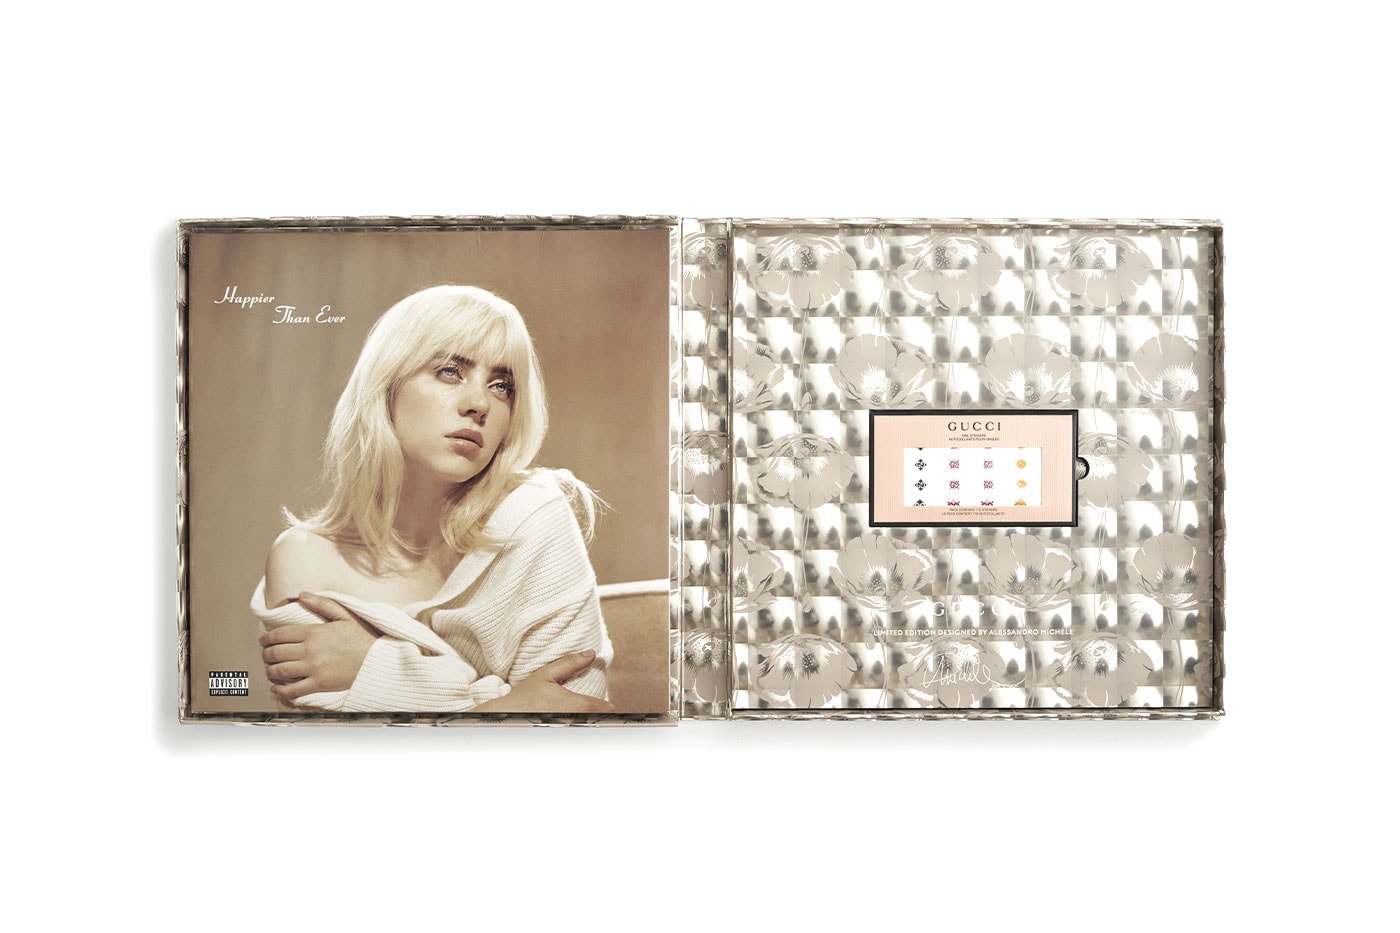 Gucci and Billie Eilish Release Limited-Edition 'Happier Than Ever' Vinyl Set alessandro michele italian luxury self-experssion los angeles artis pop nail stickers holiday christmas